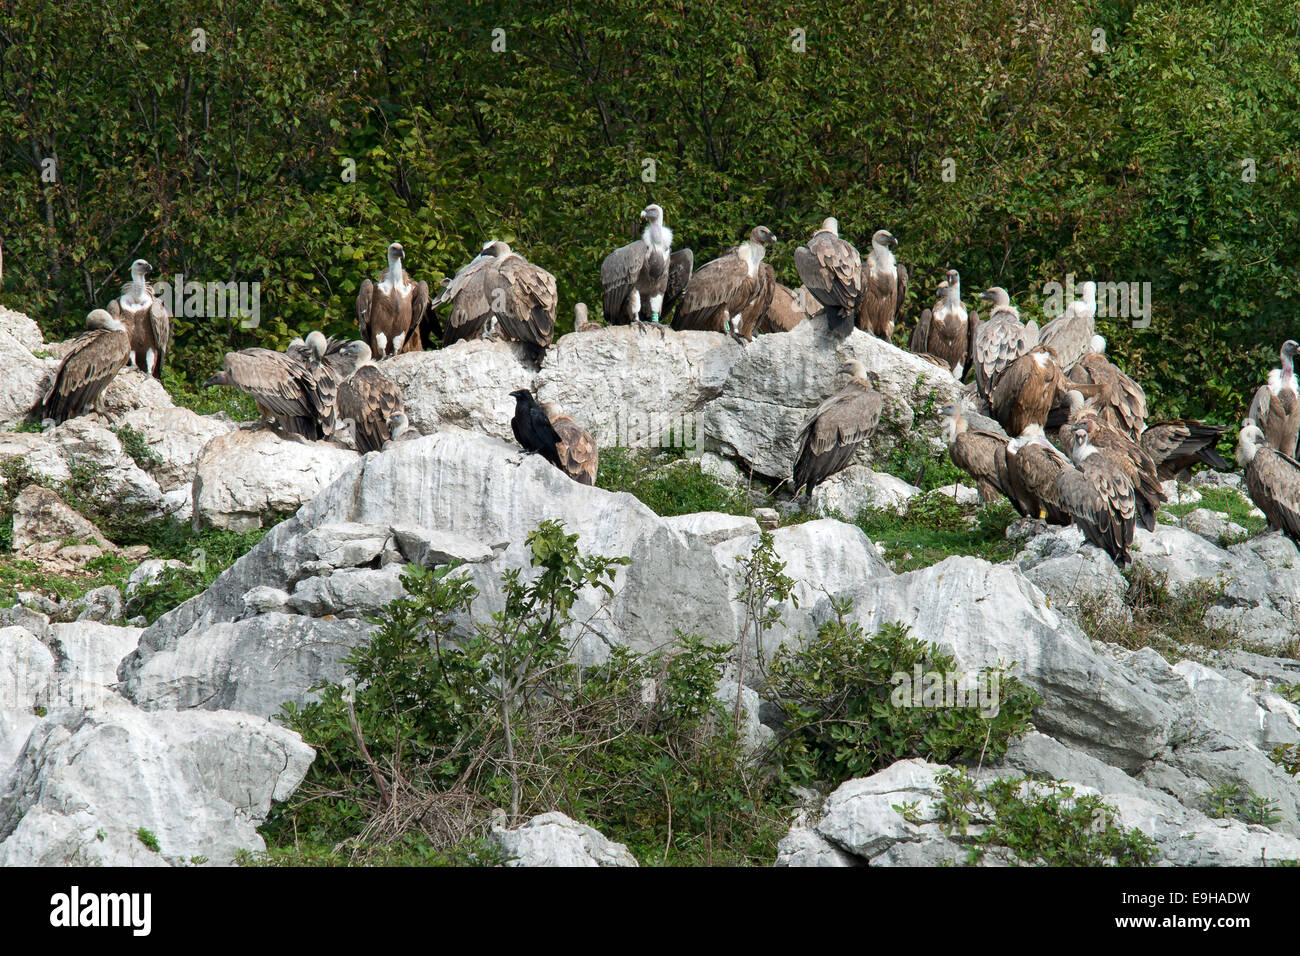 Griffon Vultures (Gyps fulvus), Province of Udine, Italy Stock Photo